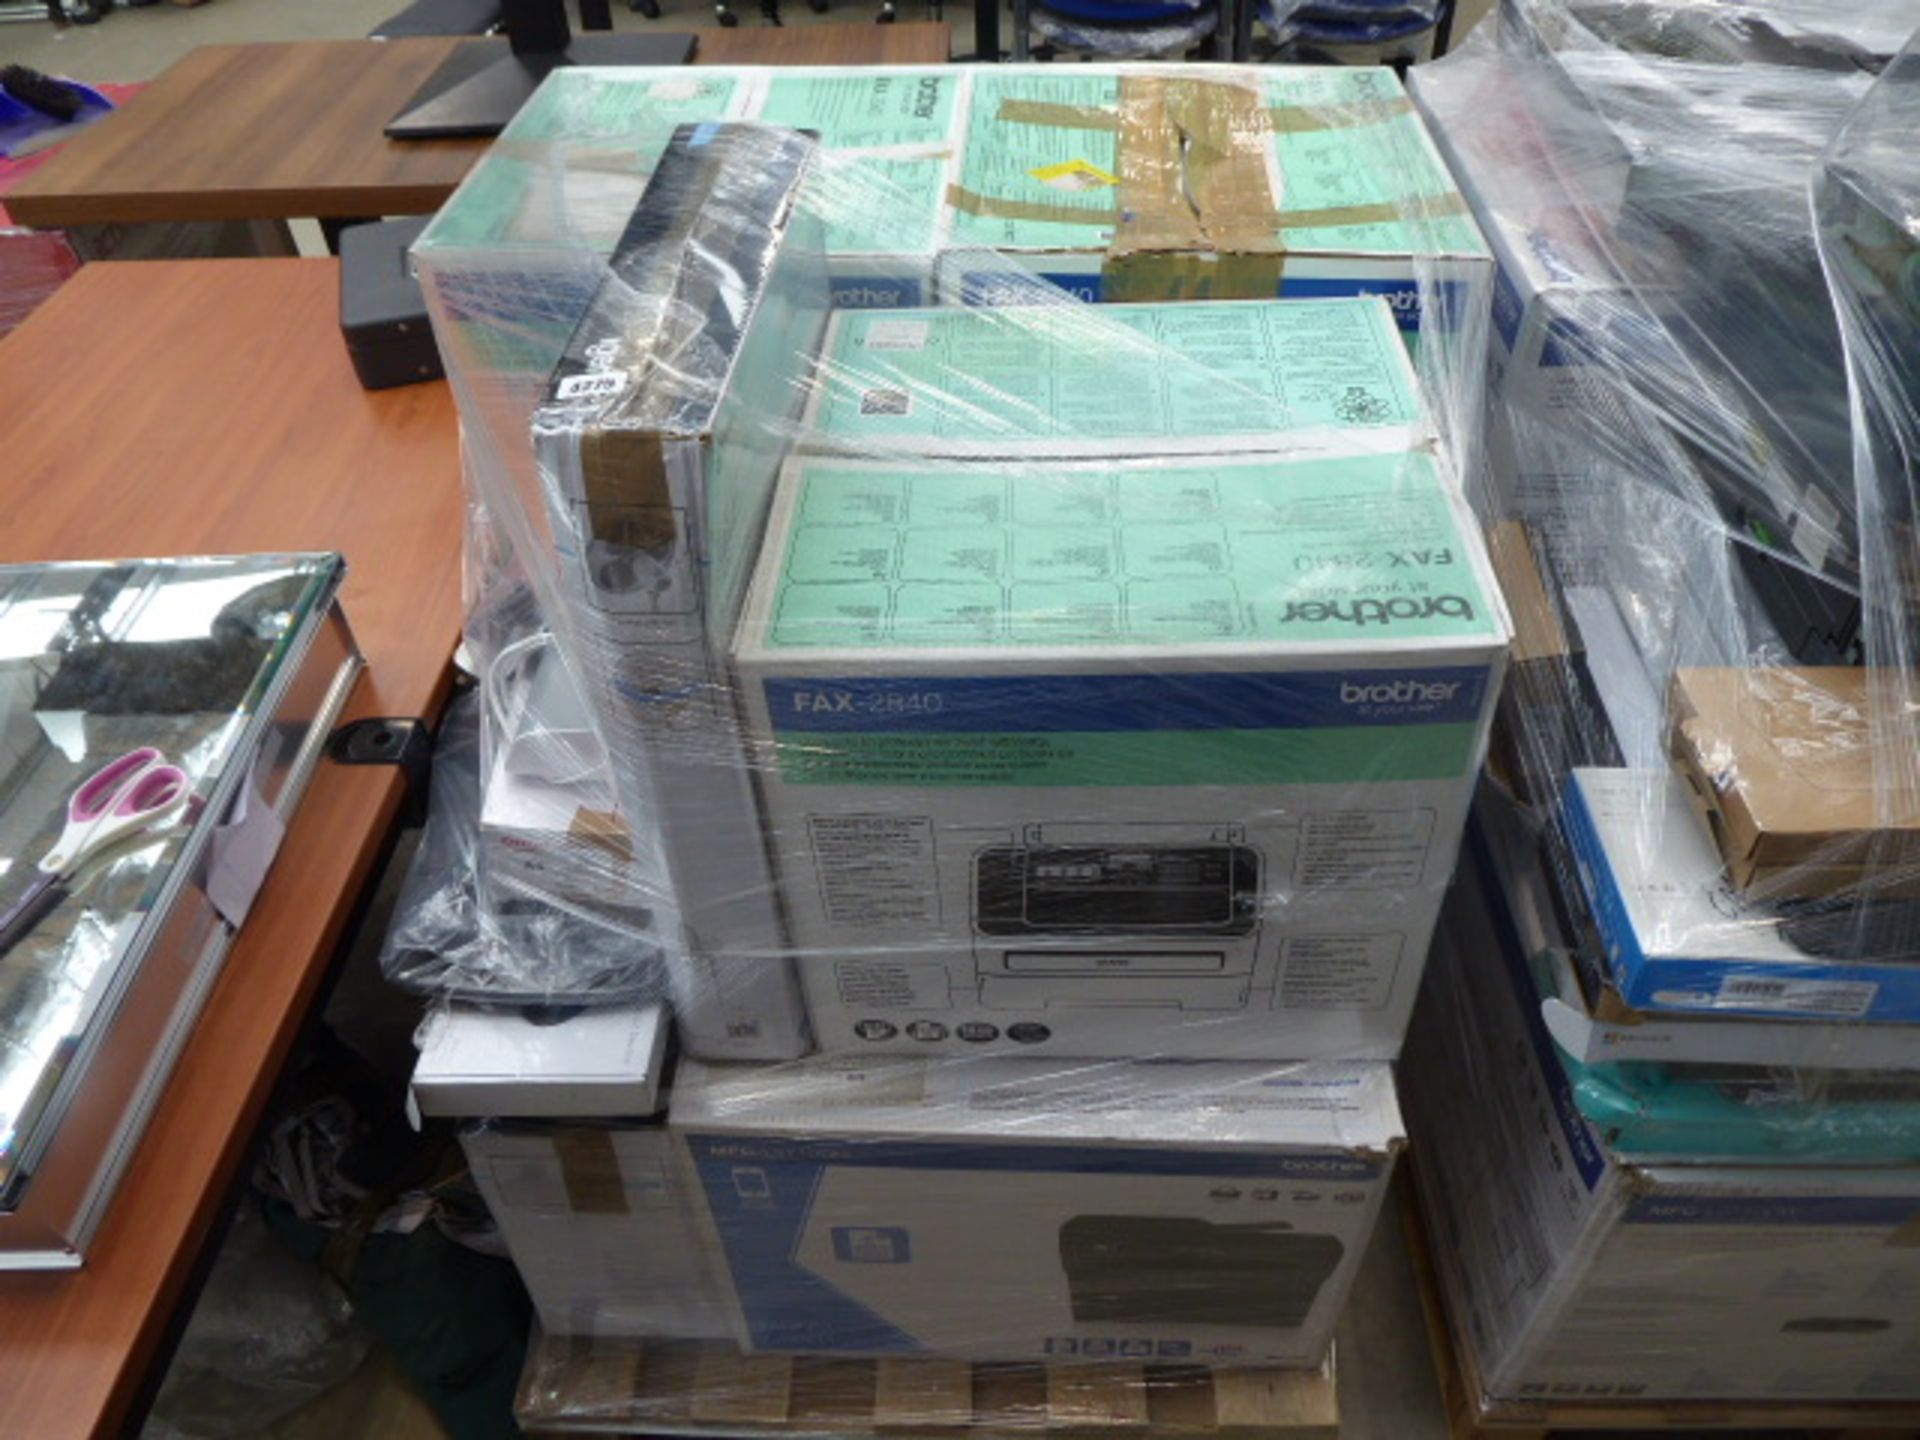 Pallet of assorted items including printers, laminators, fans, keyboards, etc